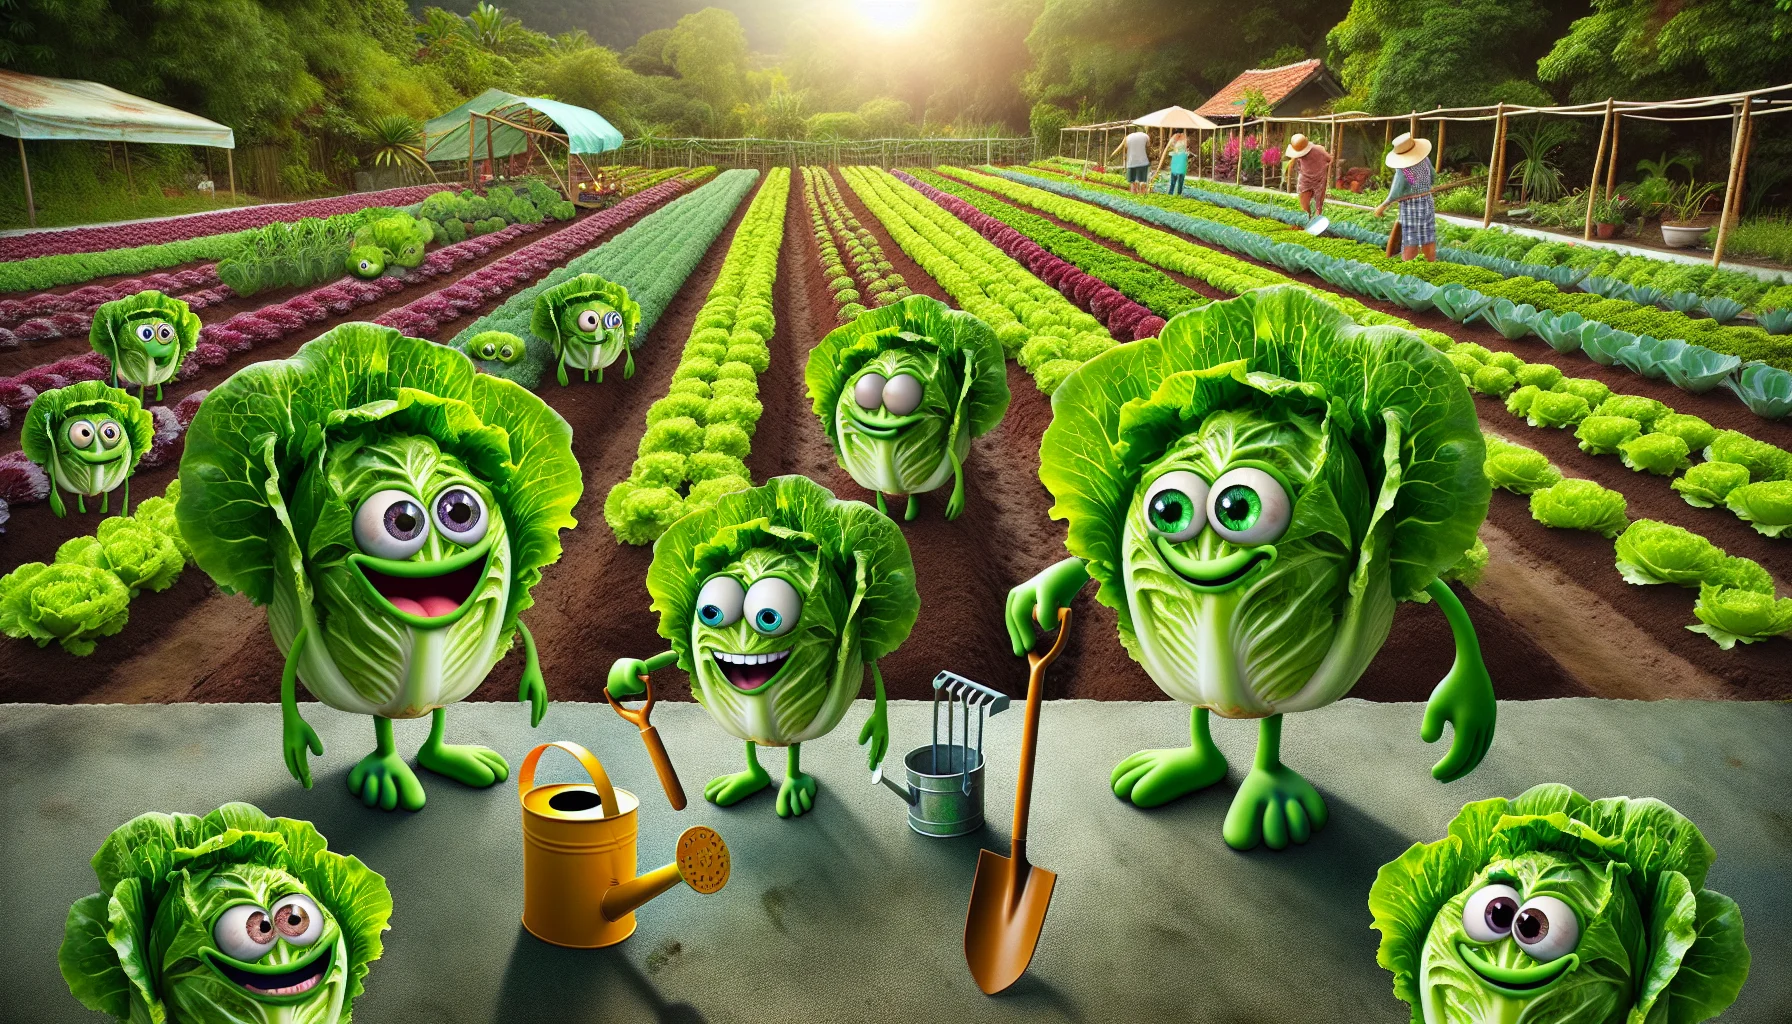 Generate an image that portrays a humorous scene of growing head lettuce. Picture a lush vegetable garden under the bright sunlight. A few head lettuces are displayed with exaggerated cartoonish eyes and smiles. Their long green leafy hands hold tools like a tiny shovel, hoe, and watering can, playfully suggesting as if they are taking care of themselves and each other. The background shows beautifully organized rows of other vegetables, mingling in this fun-filled gardening environment. Make the image lively, colorful, and detailed in order to capture the joy and attraction of home gardening.